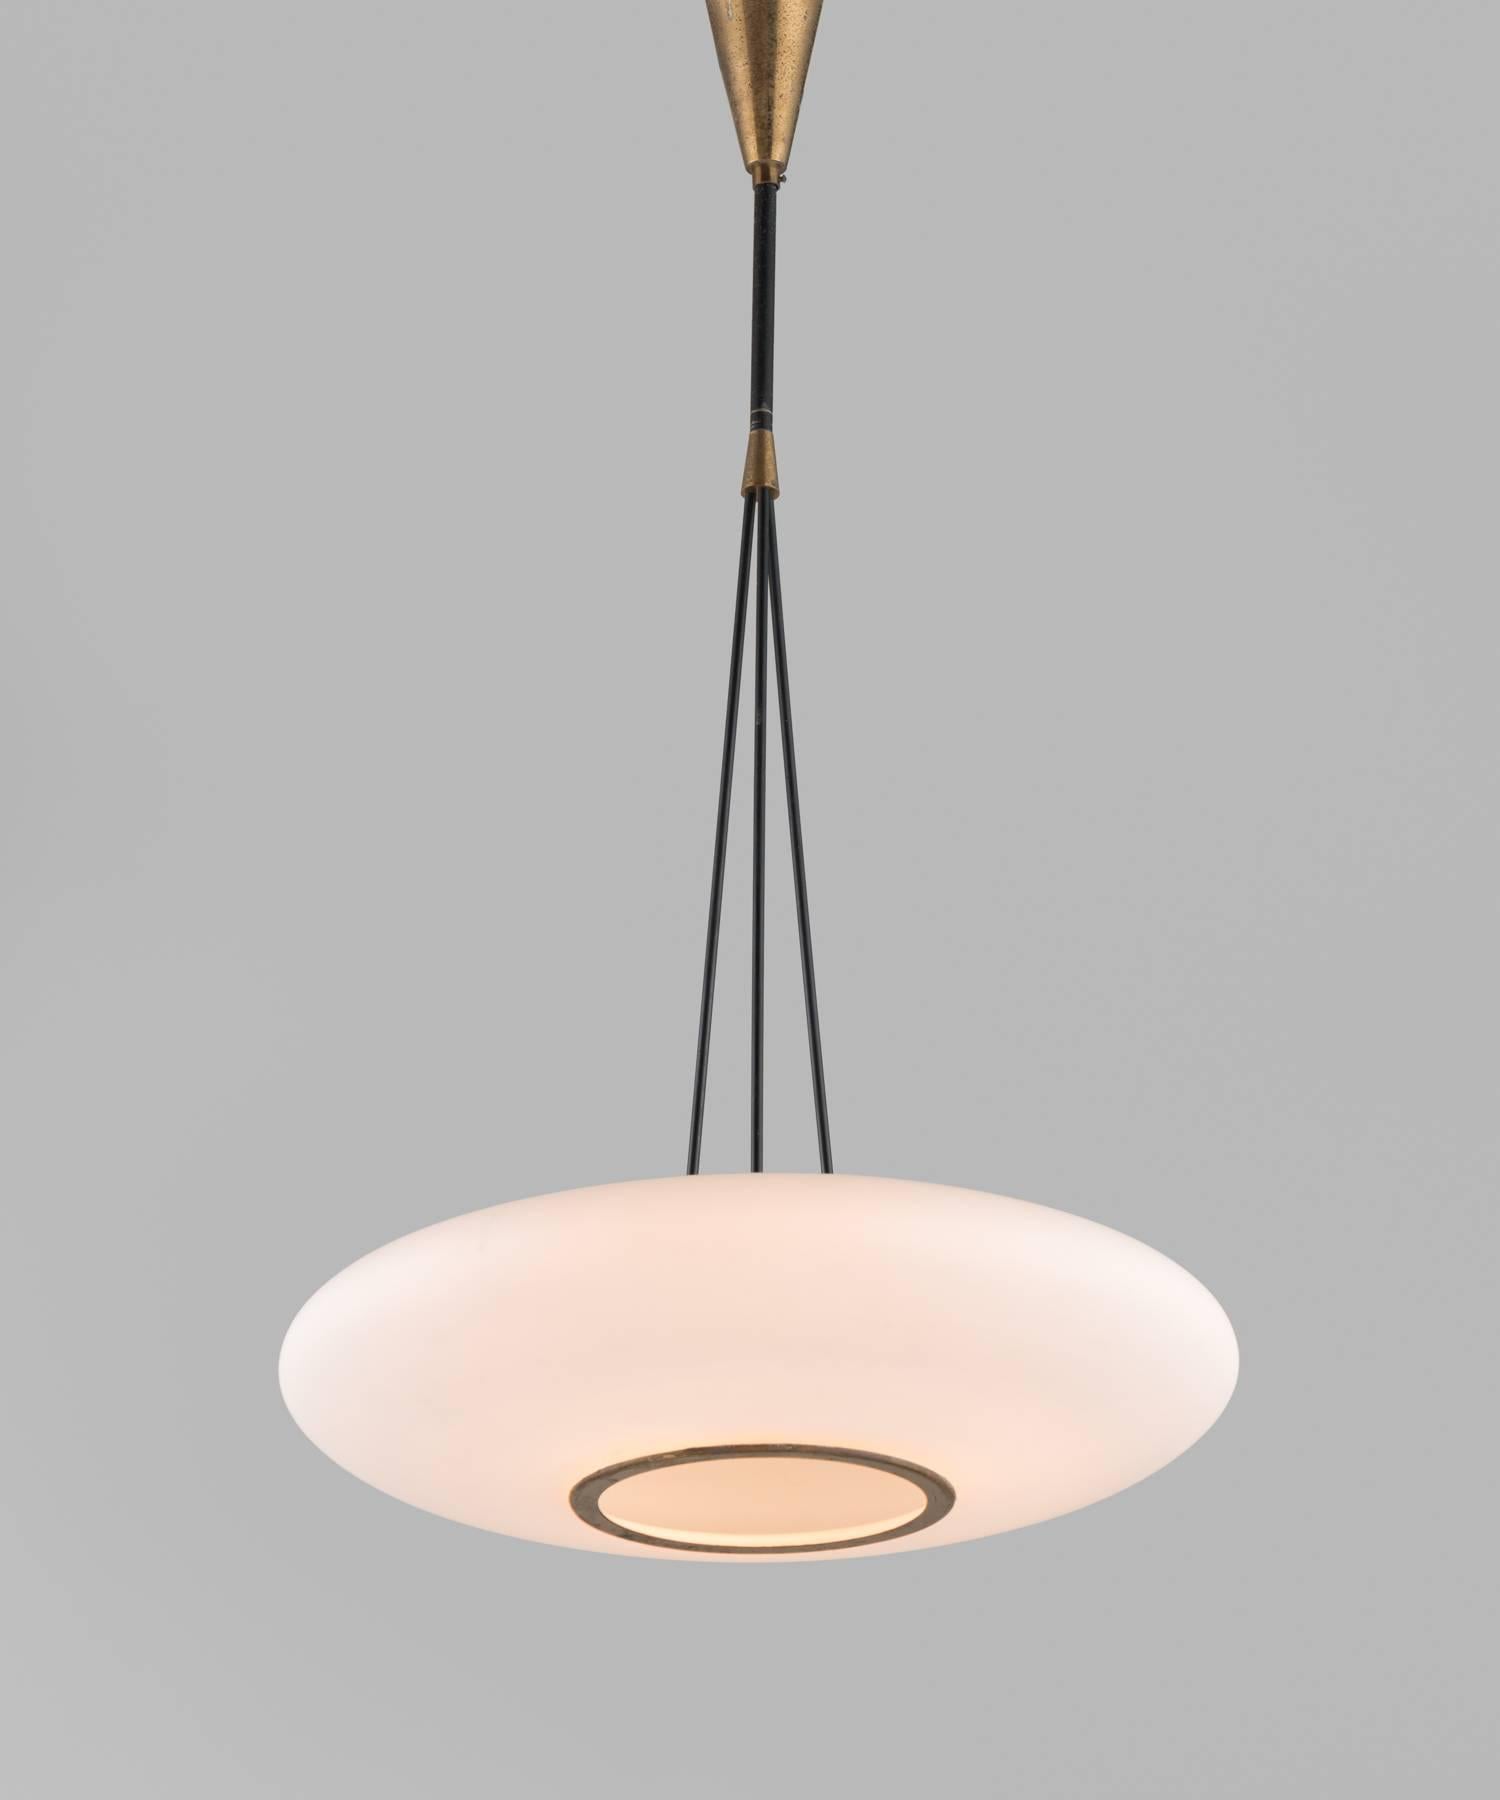 Opaline and brass suspension lamp by Stilnovo, circa 1950.

Sleek opaline glass shade with brass accents and canopy.